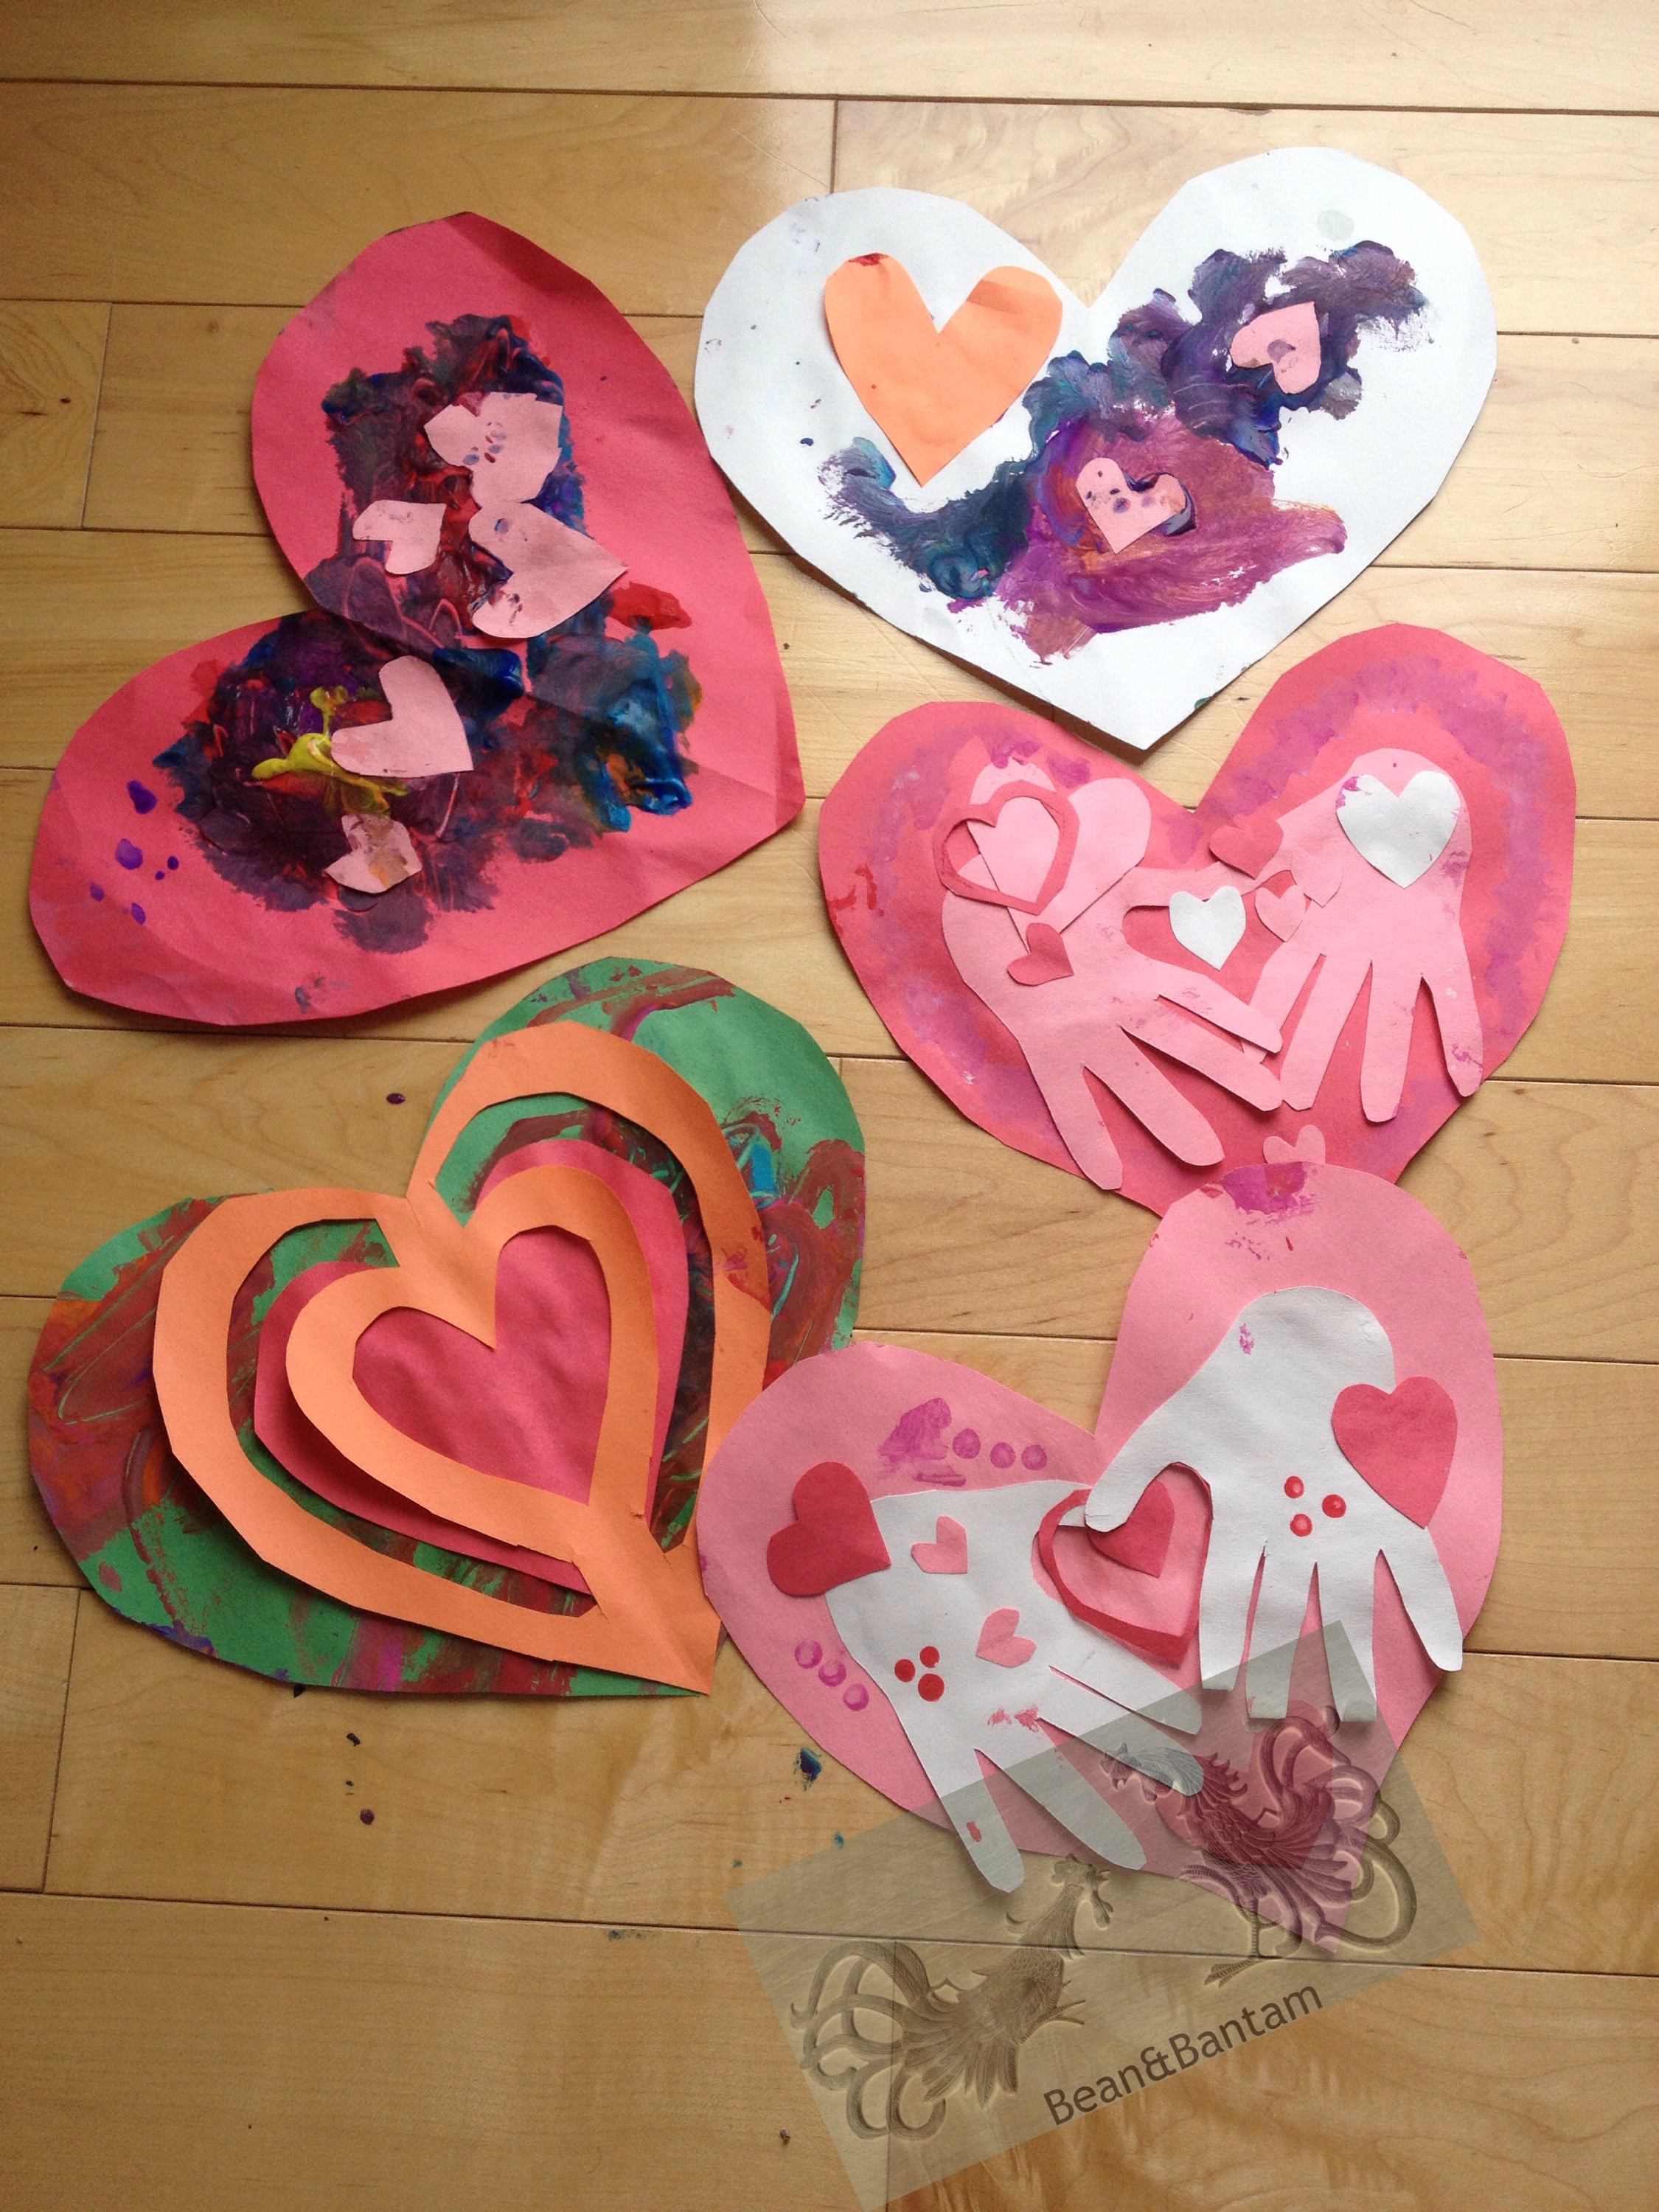 Messy Kid Fun: handmade valentines with a two and a half year old